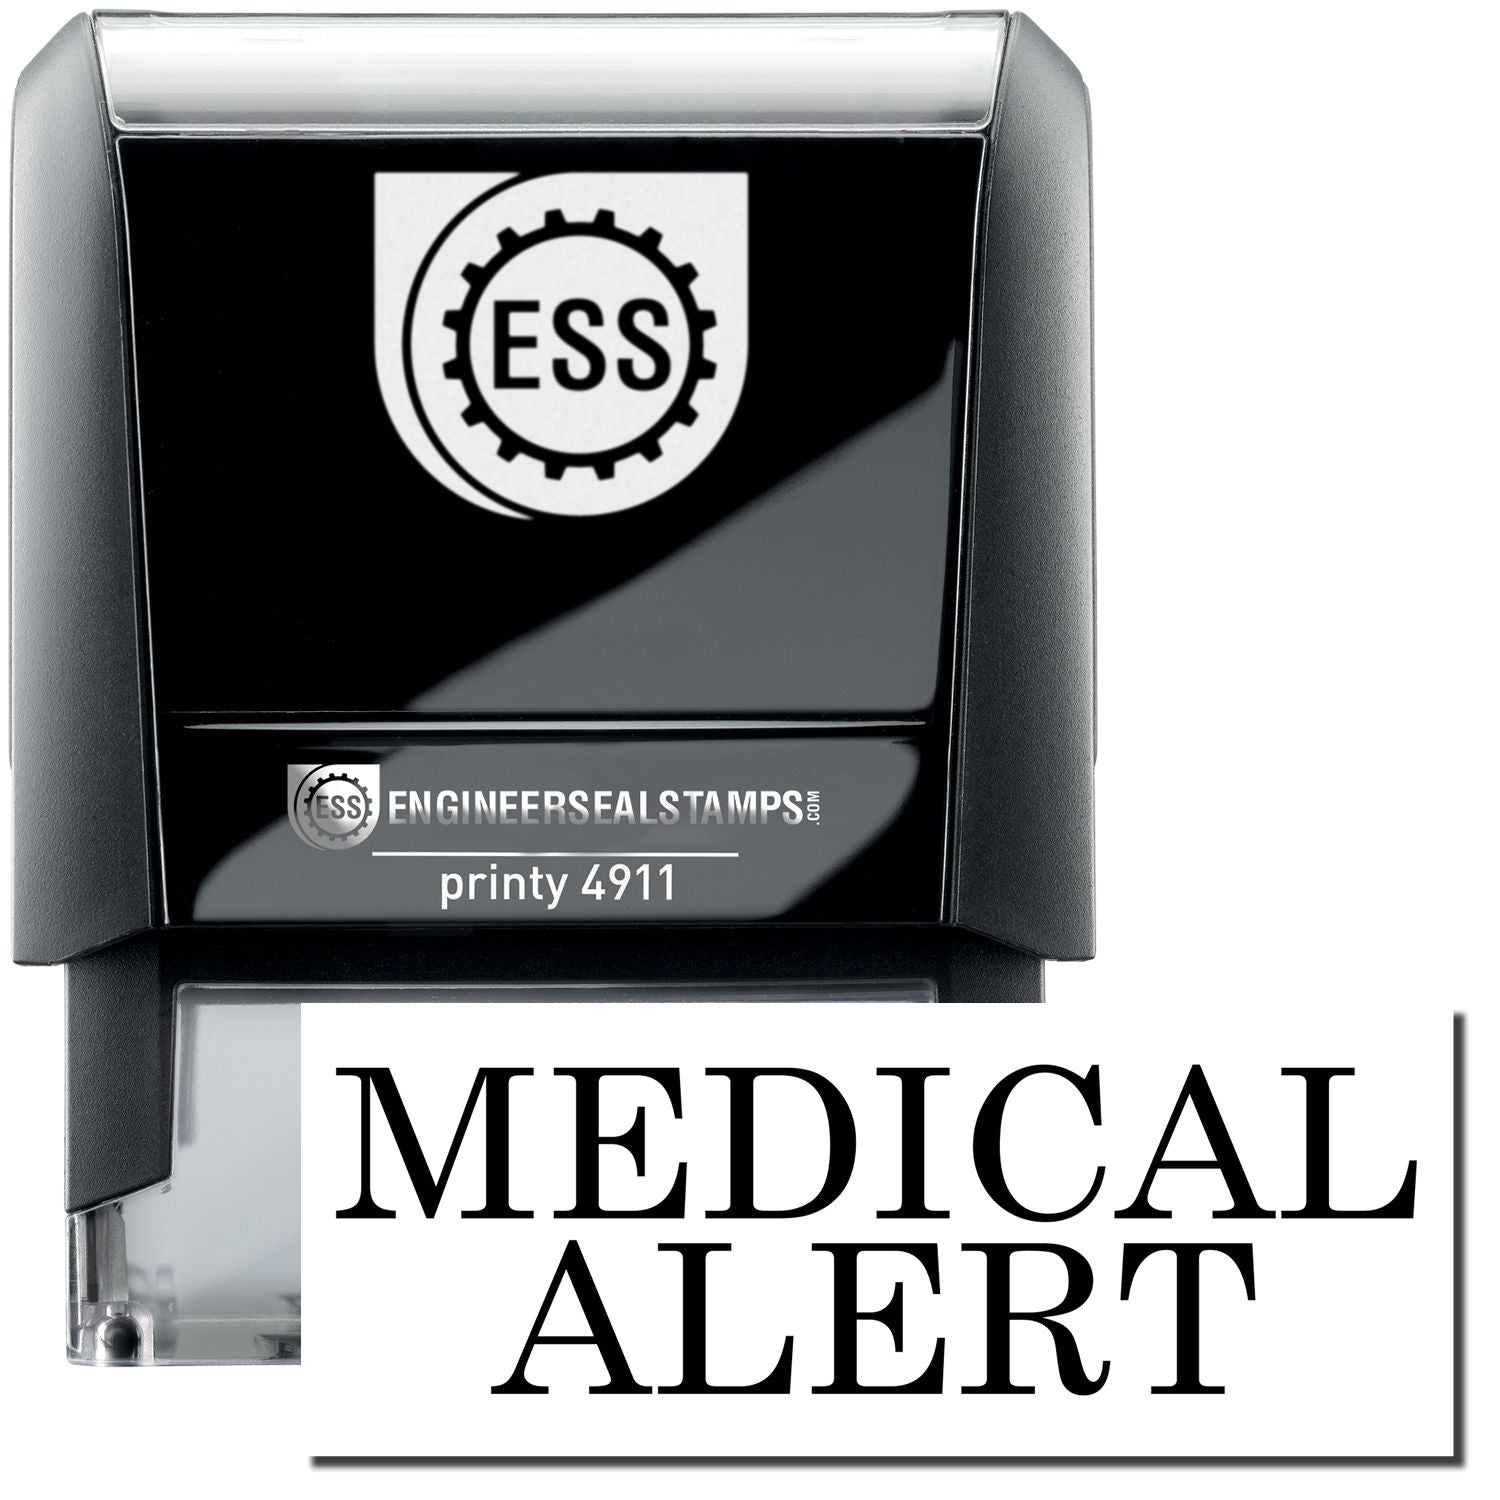 A self-inking stamp with a stamped image showing how the text "MEDICAL ALERT" is displayed after stamping.